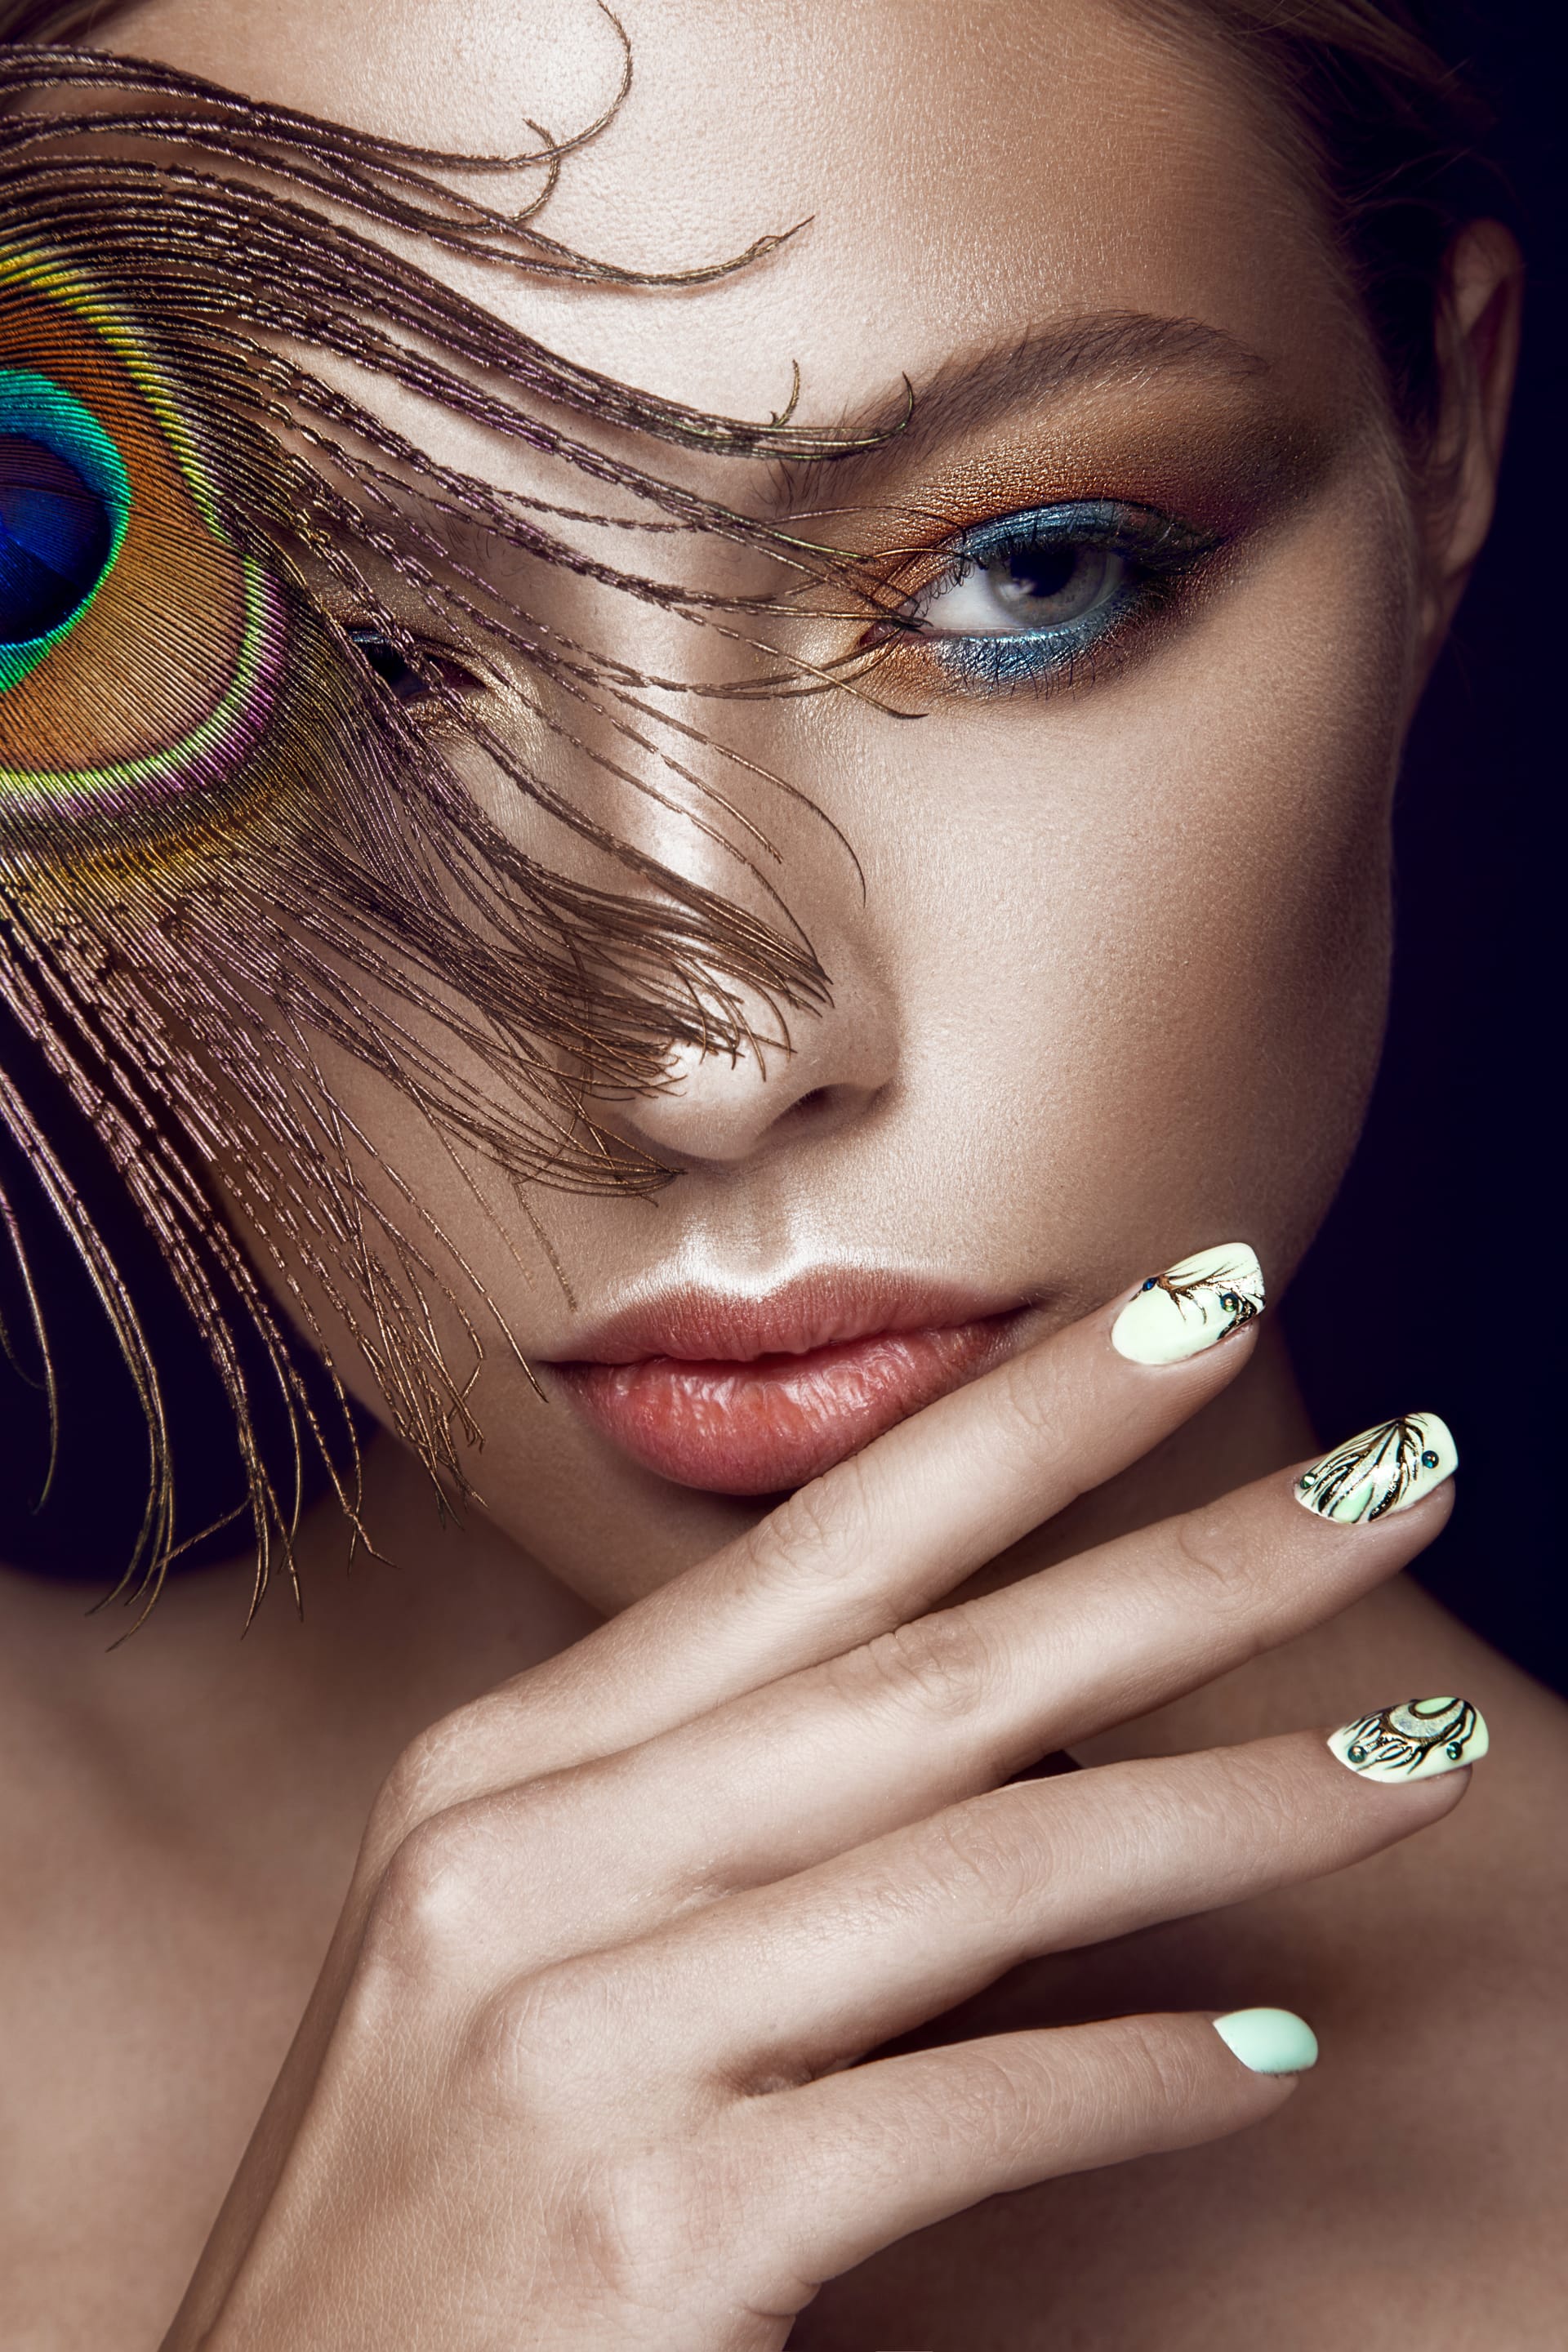 Bright makeup manicure design peacock feather her face art nails